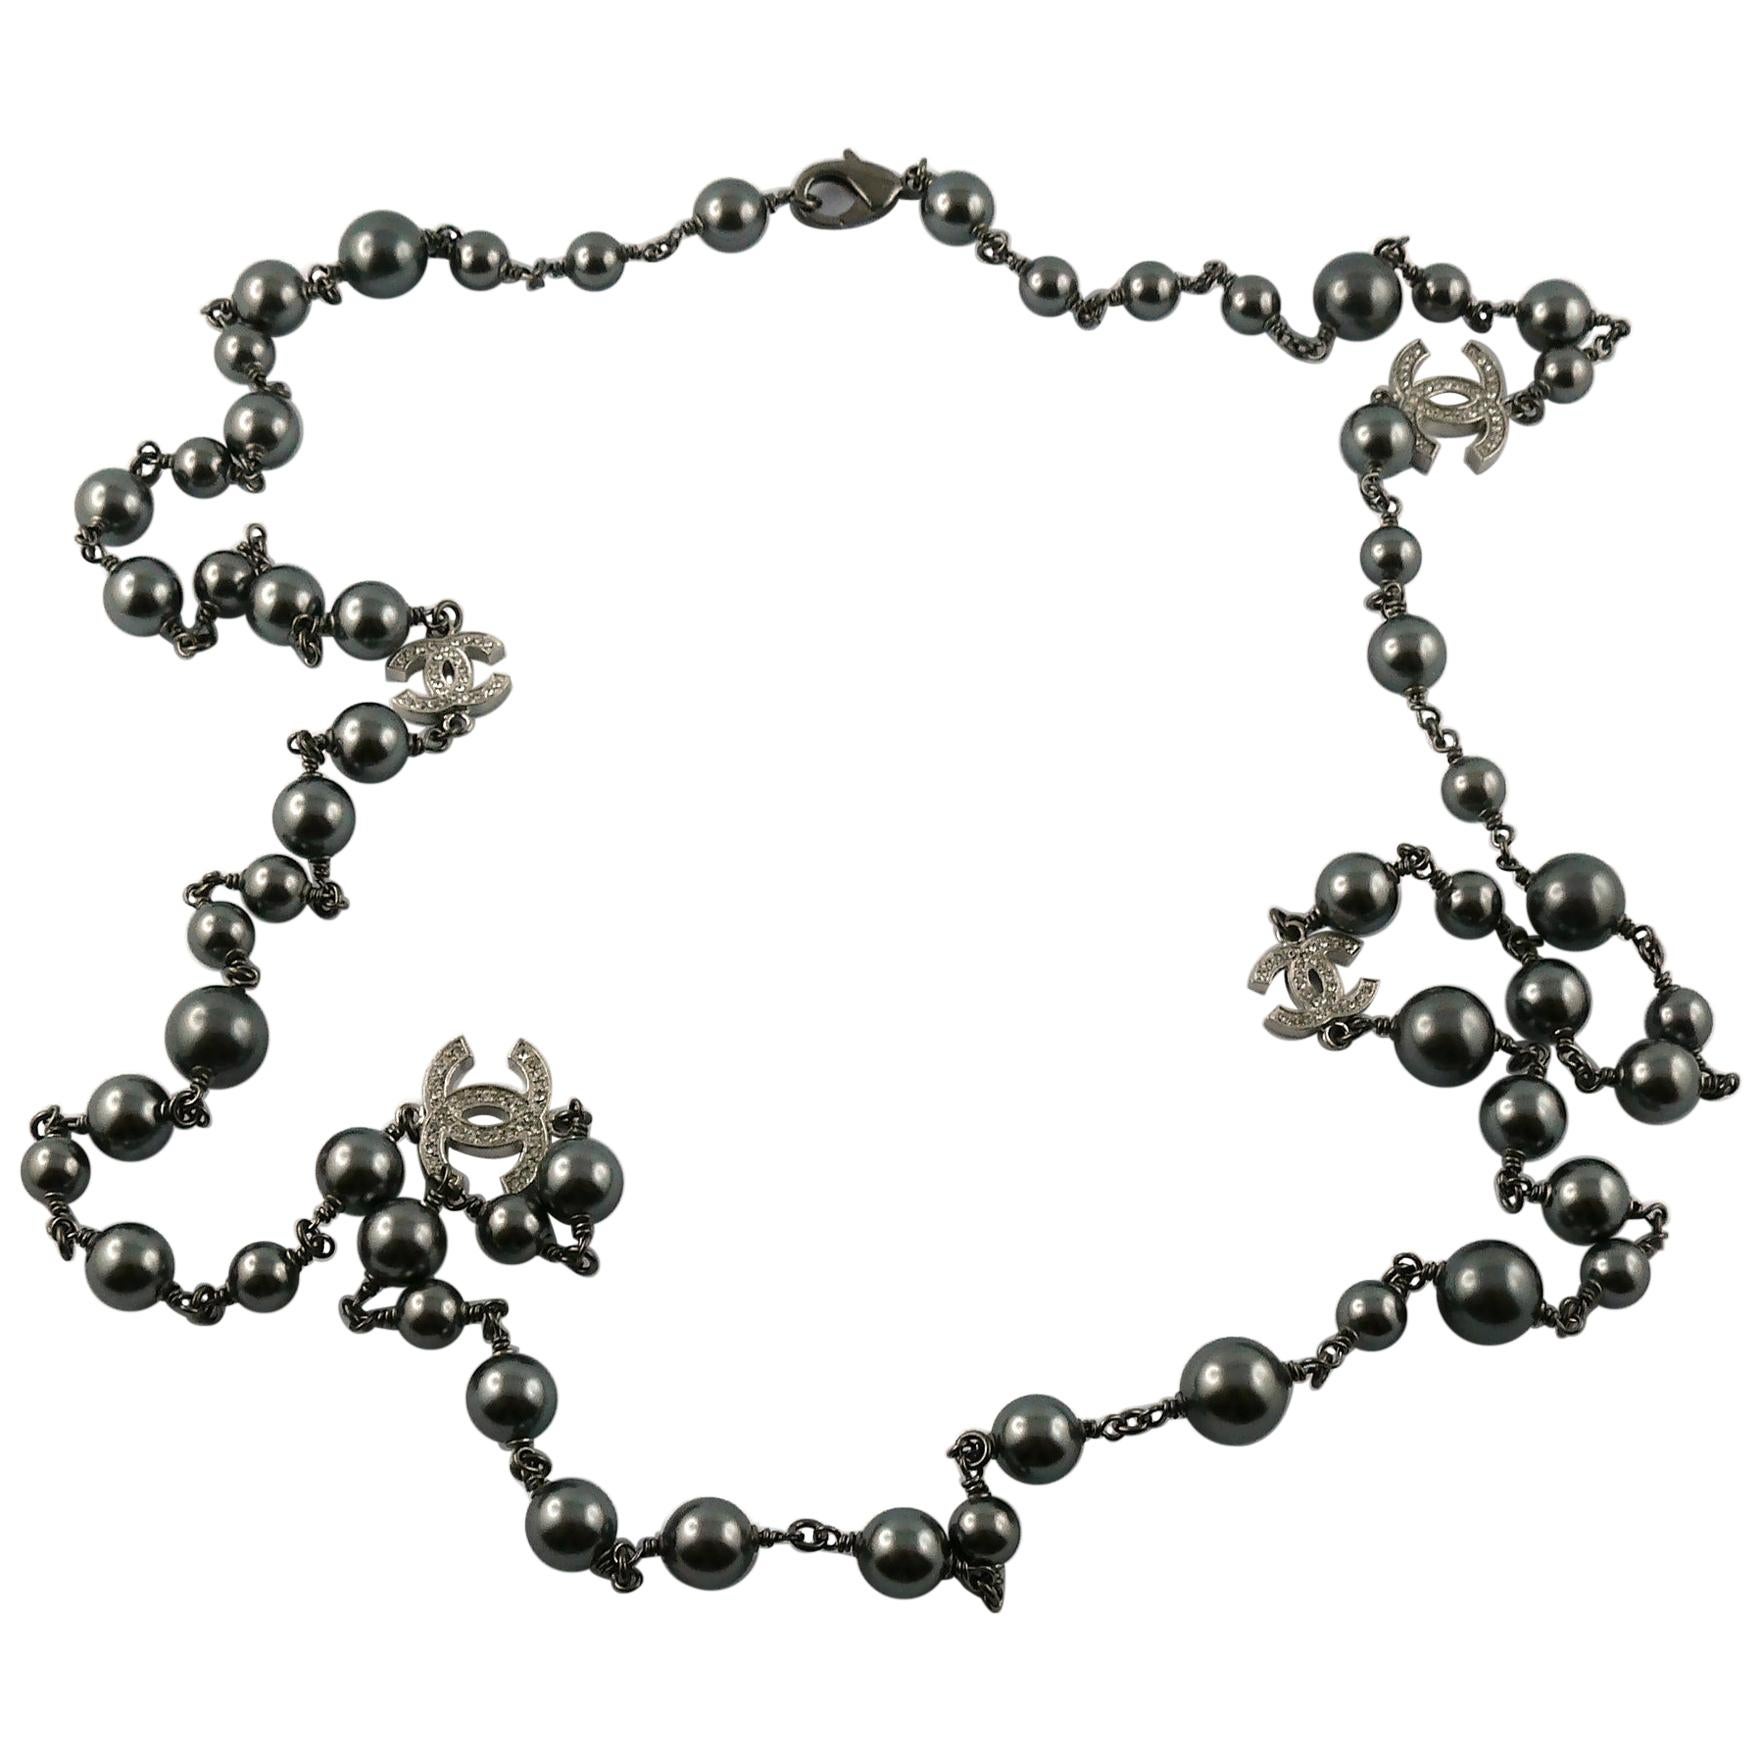 Chanel by Karl Lagerfeld 2018 Hematite Grey Pearl and Diamante CC Logos Necklace